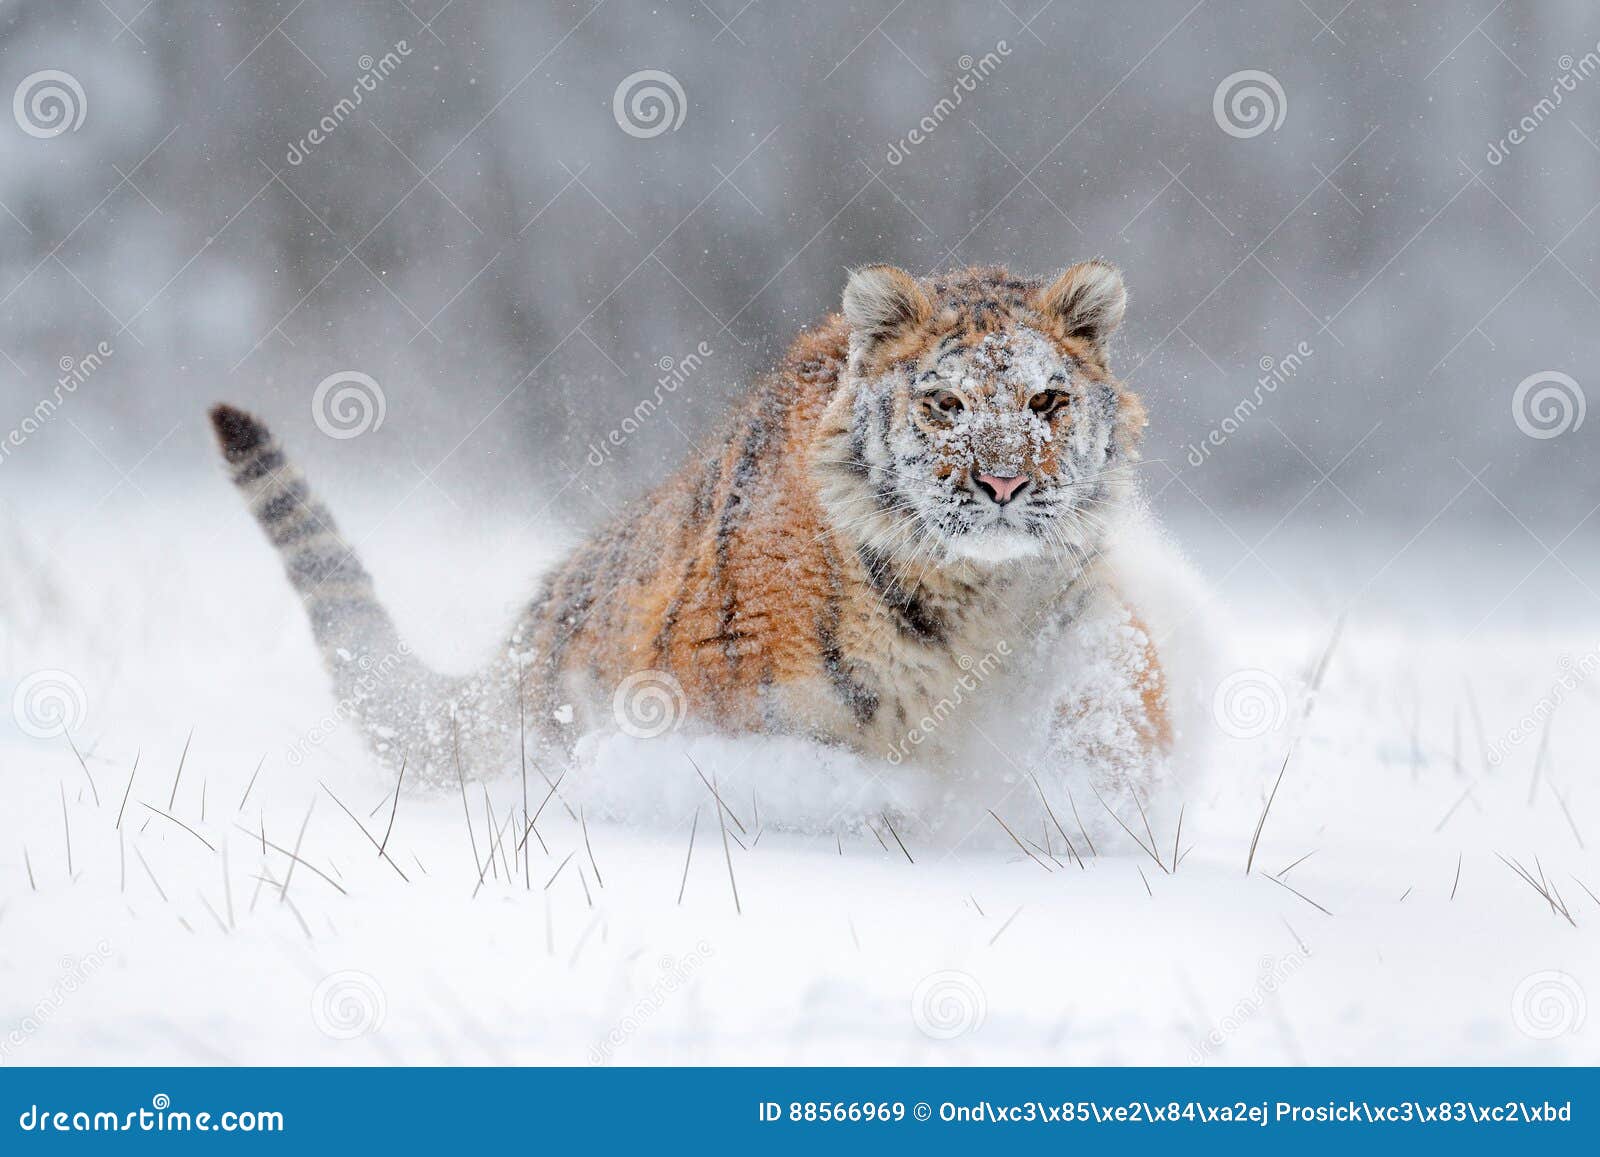 amur tiger running in the snow. tiger in wild winter nature. action wildlife scene with danger animal. cold winter in tajga, russi